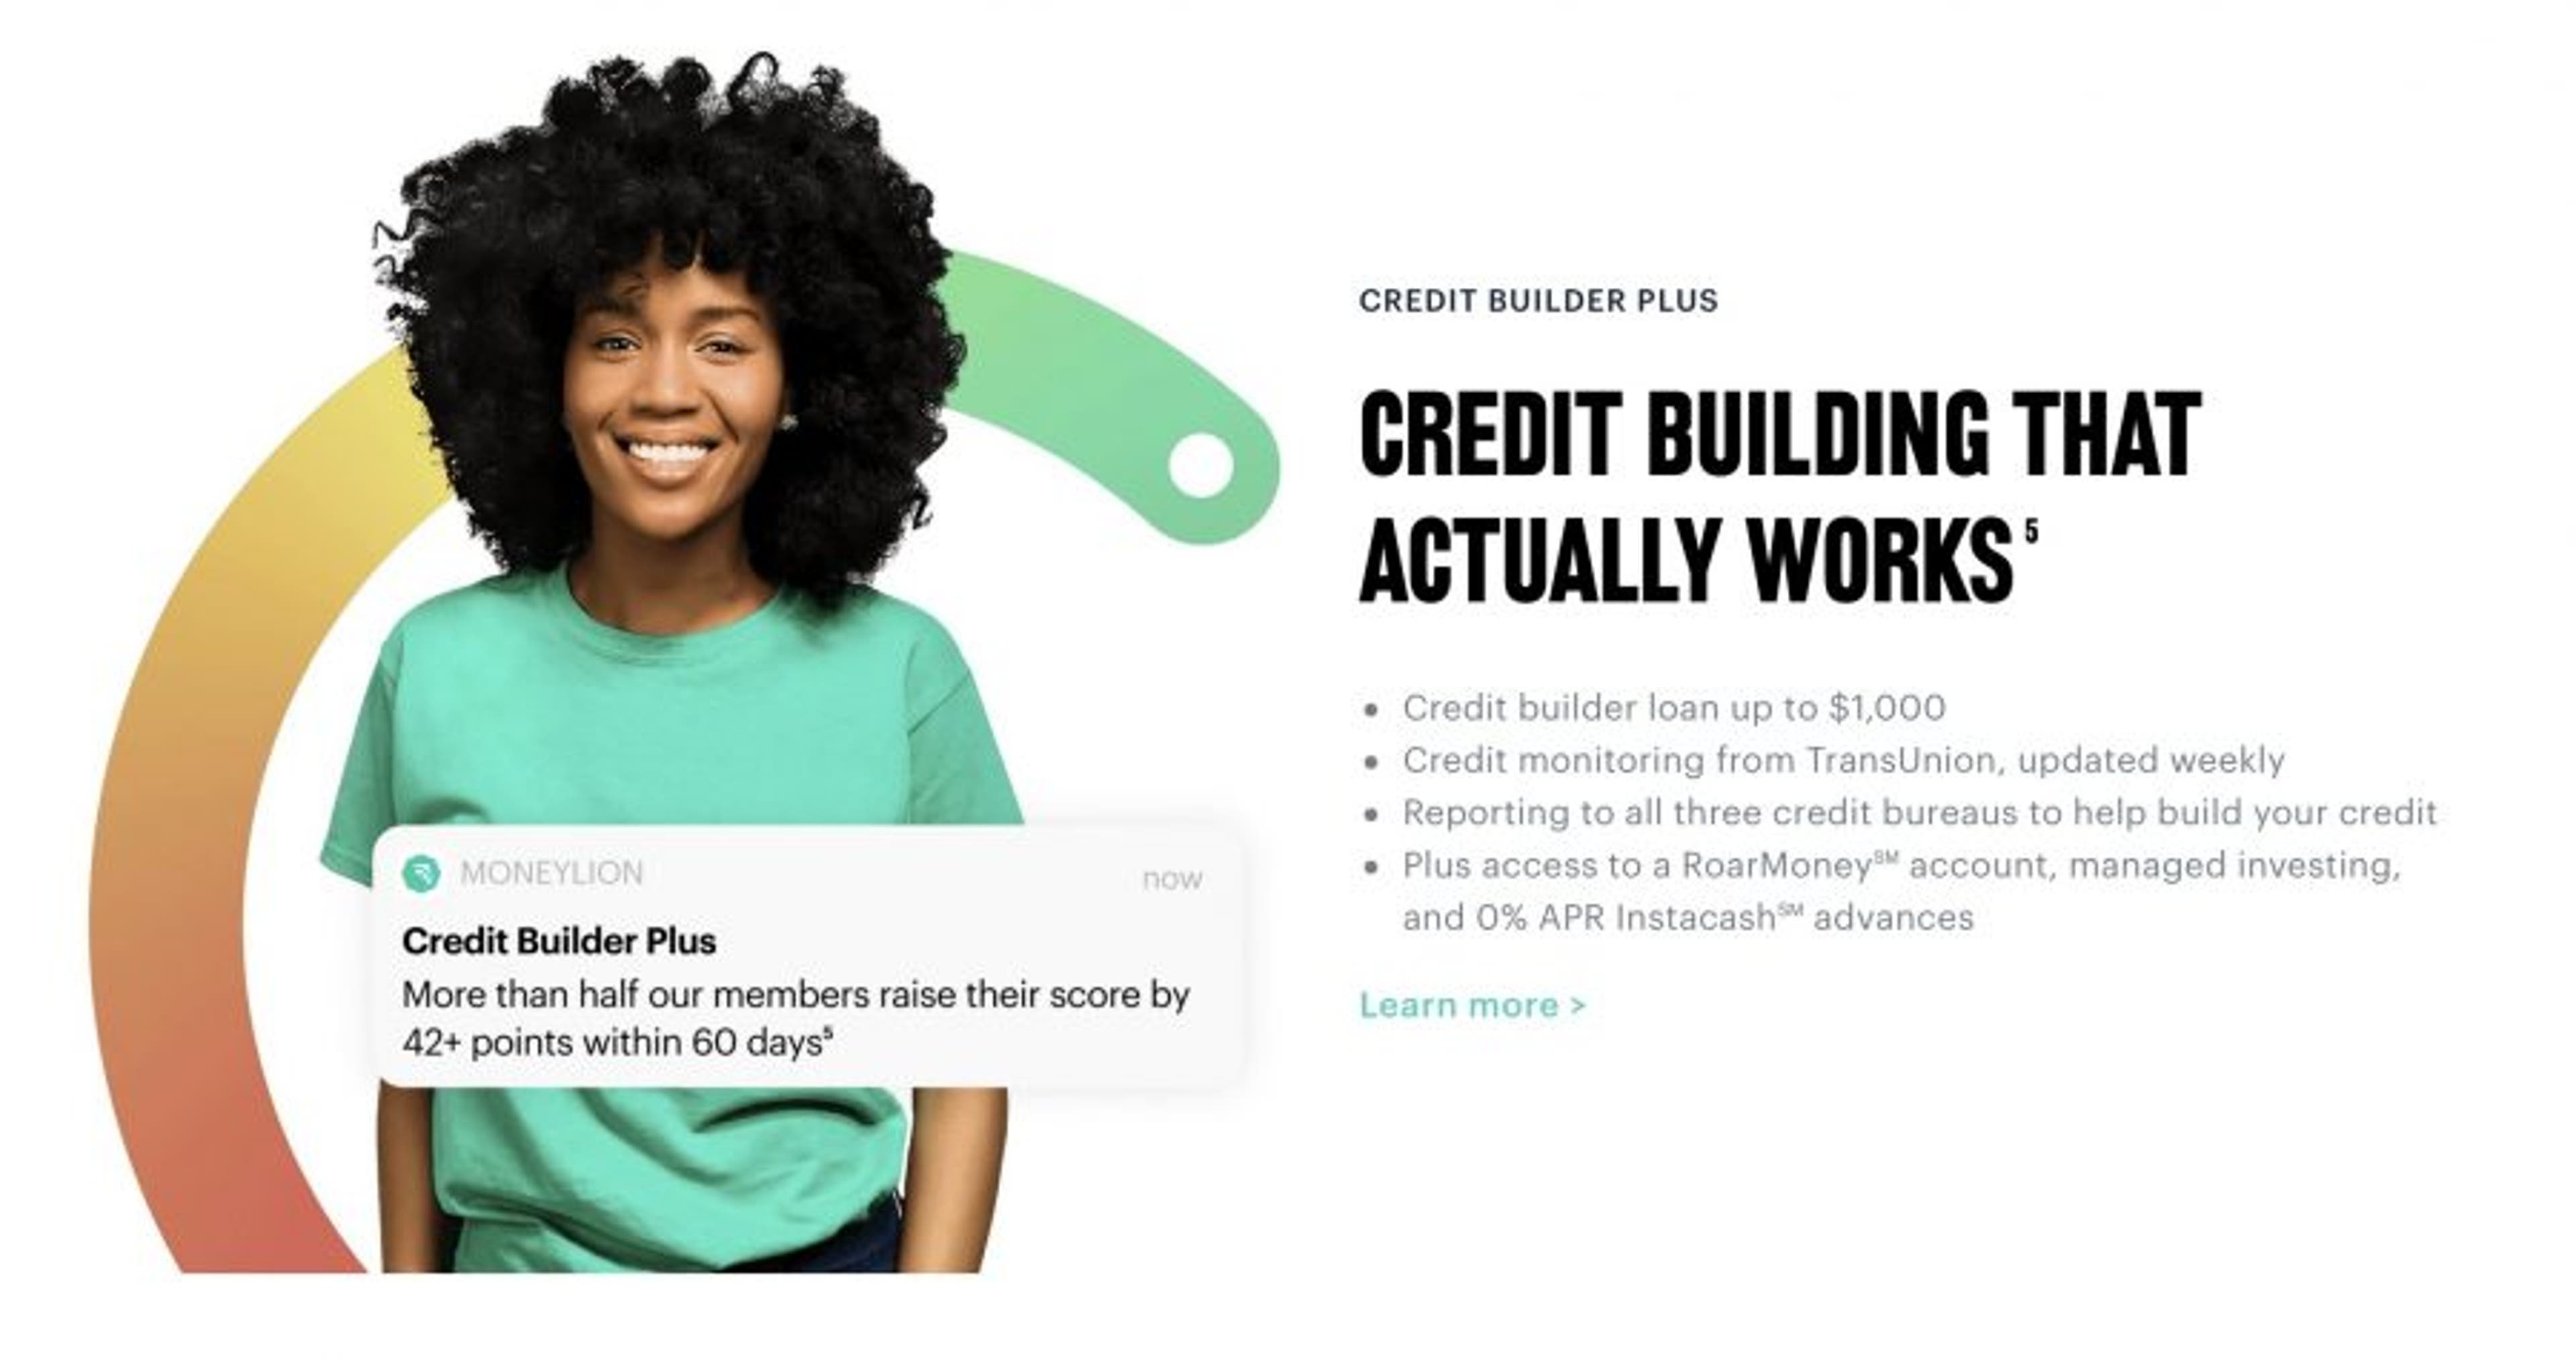 Personal Loans That Build Credit From MoneyLion